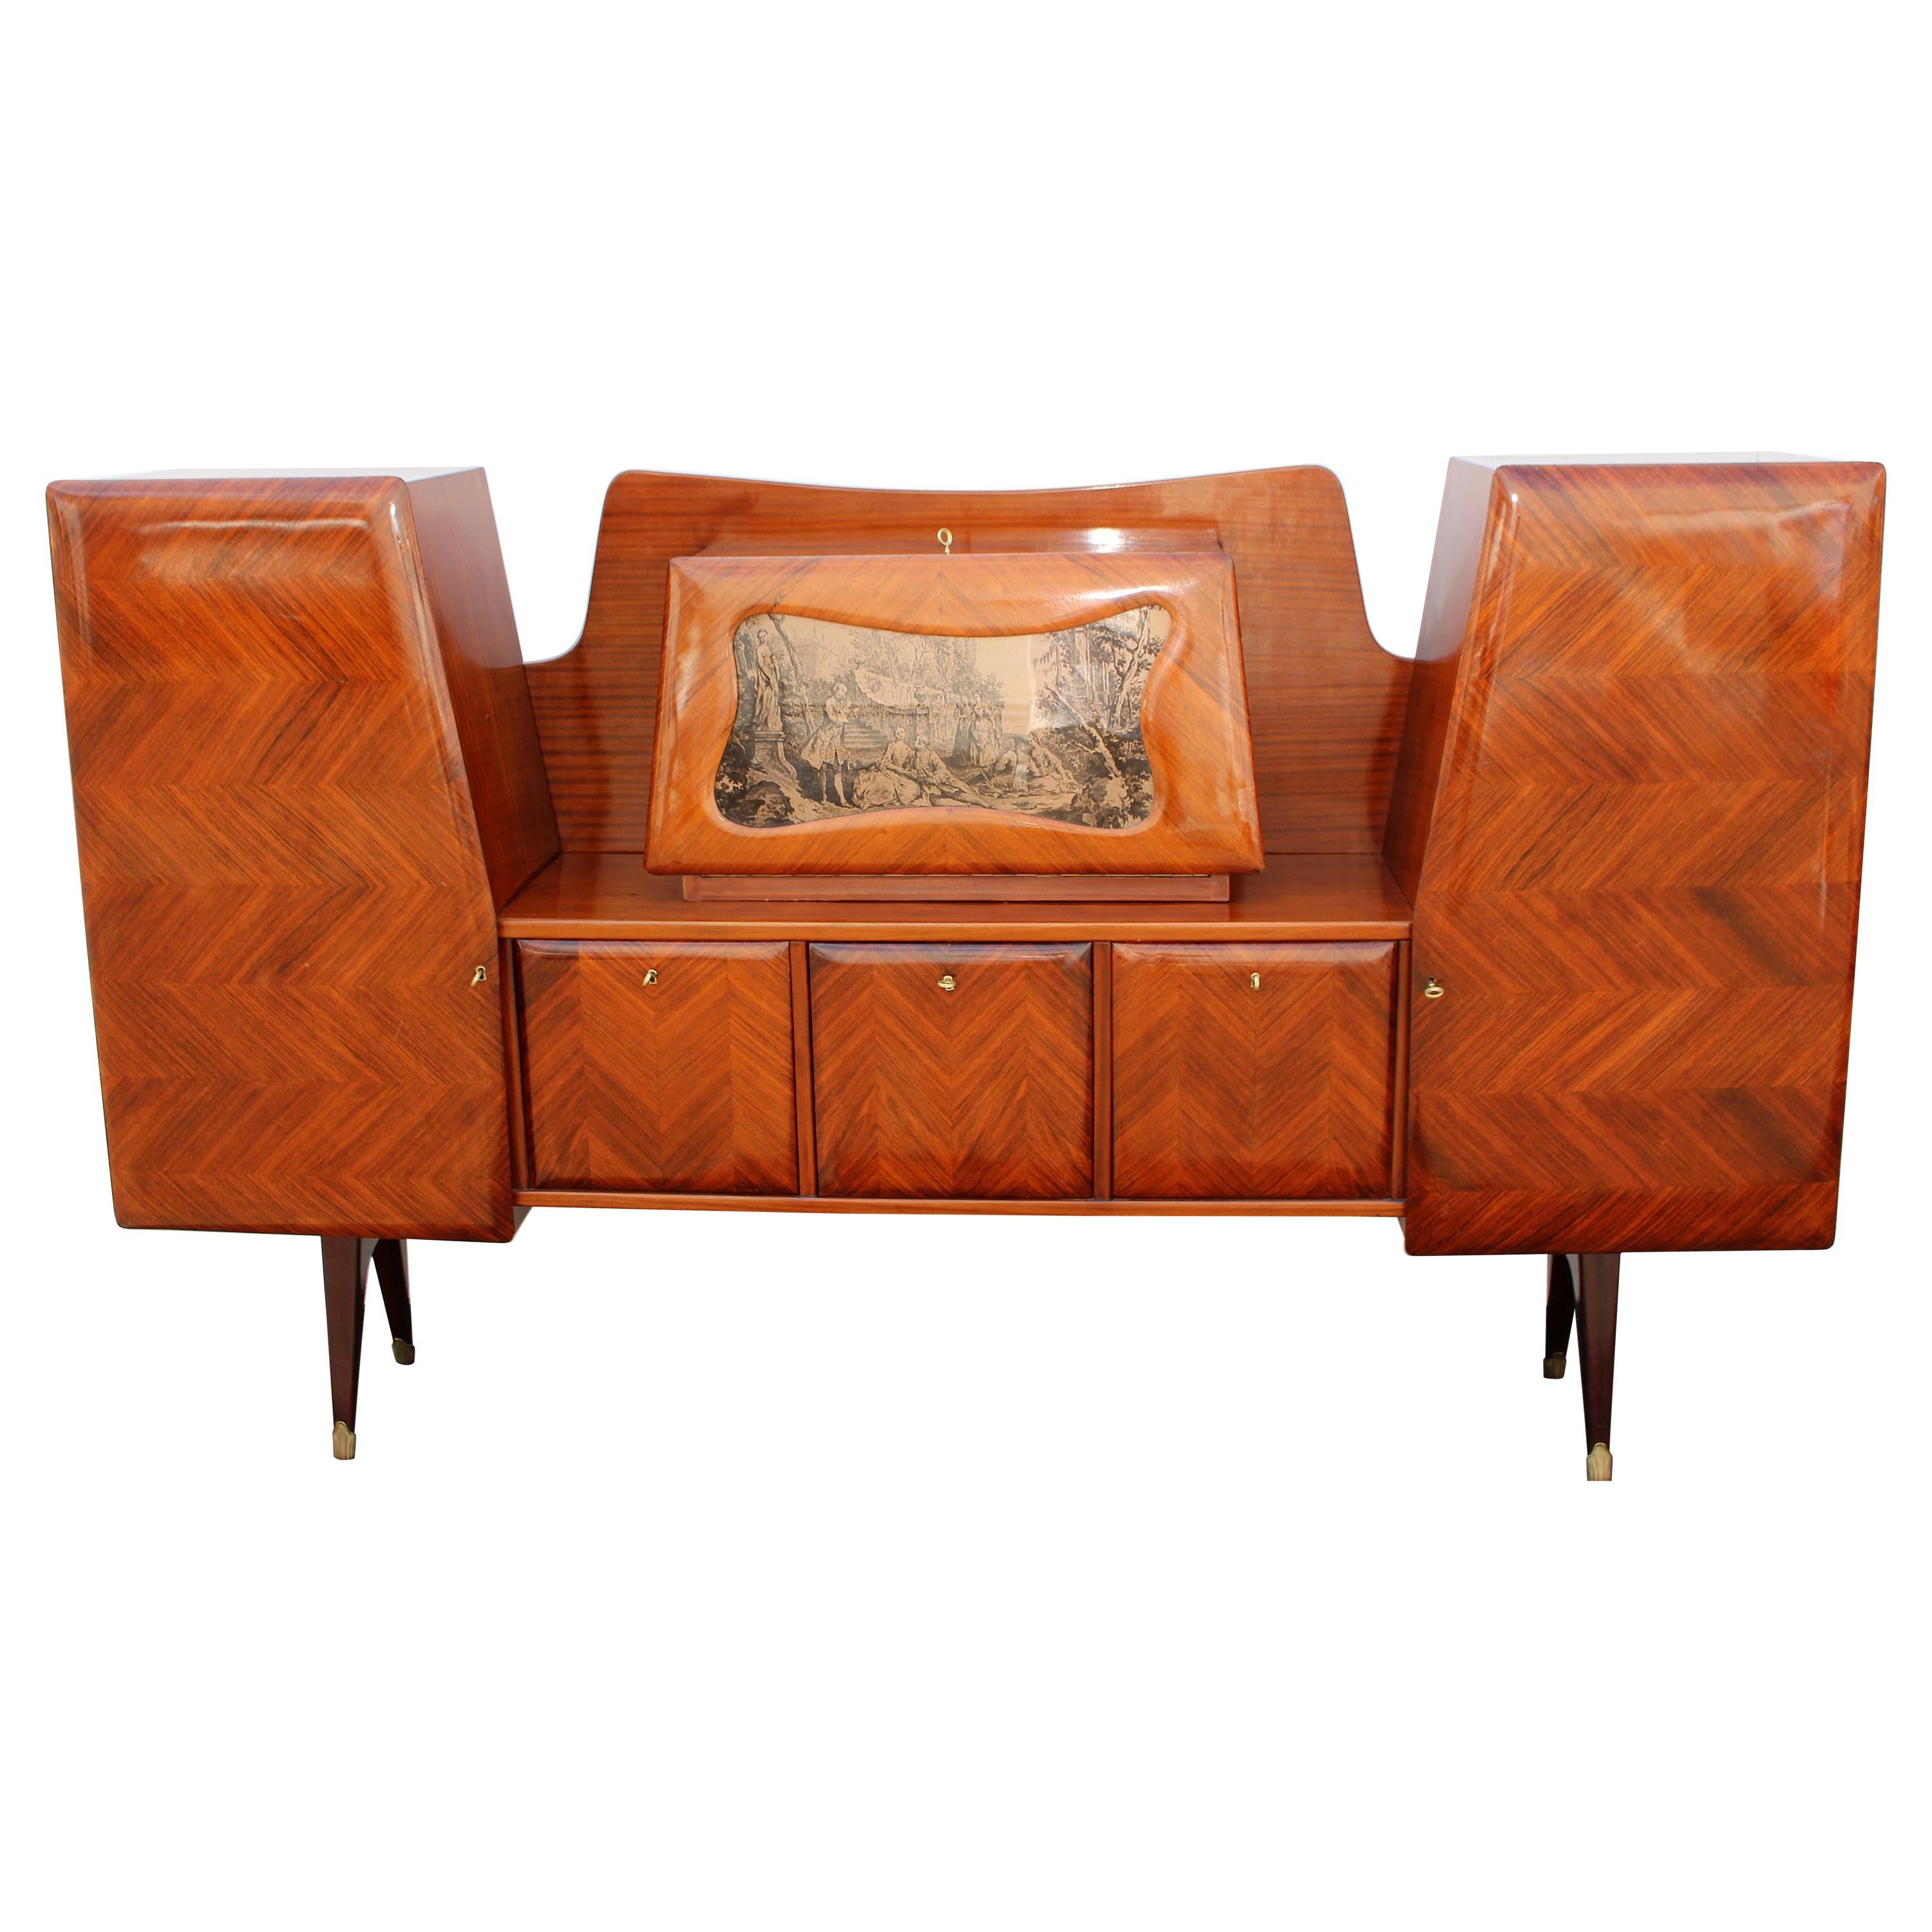 Paolo Buffa Attributed Rosewood Parquetry Buffet For Sale